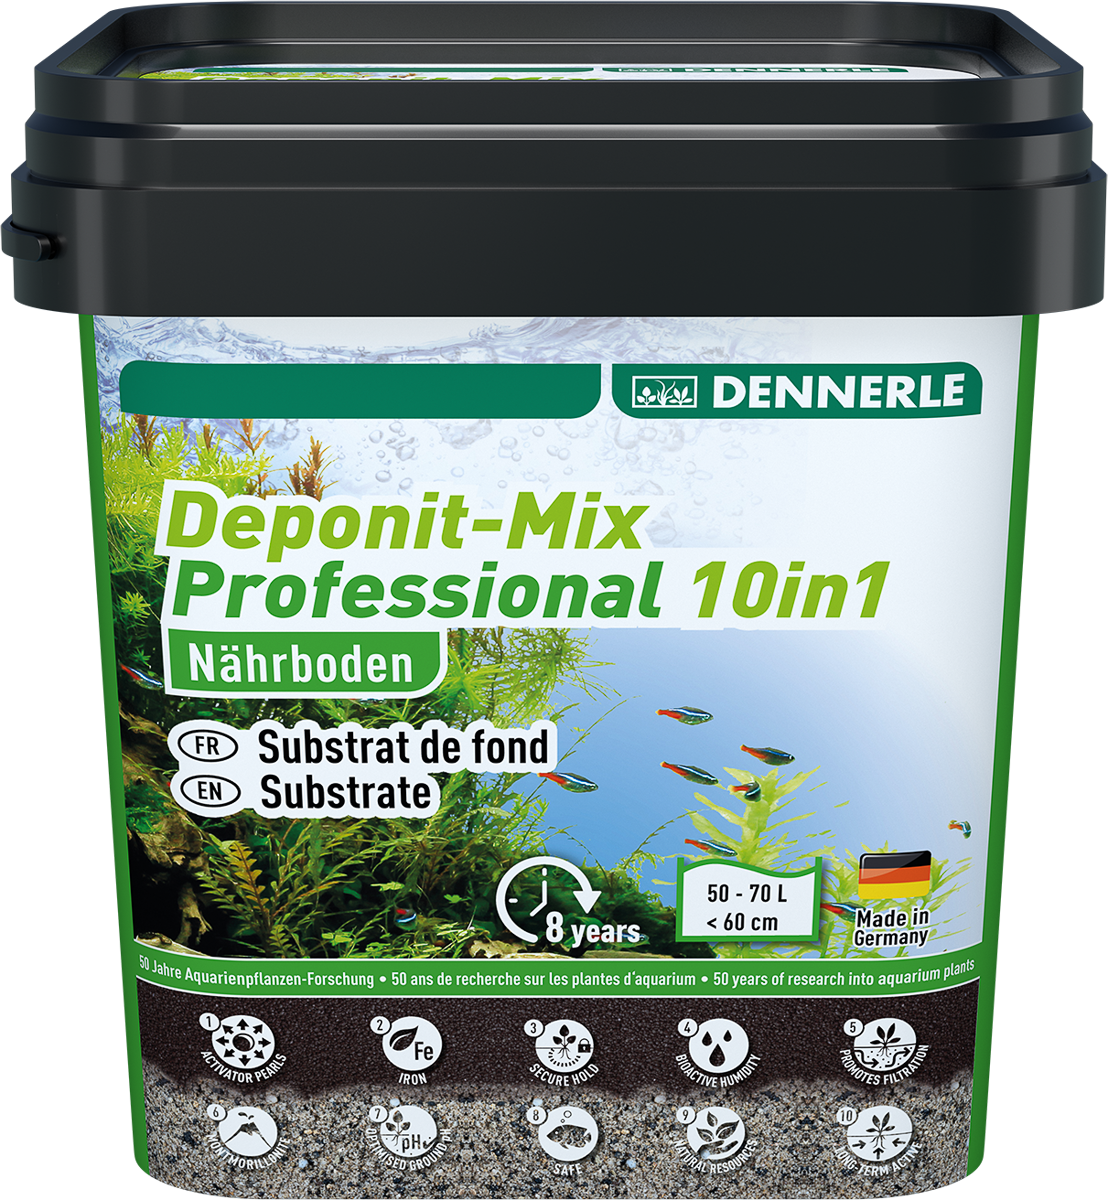 Dennerle Deponit-Mix Professional 10in1